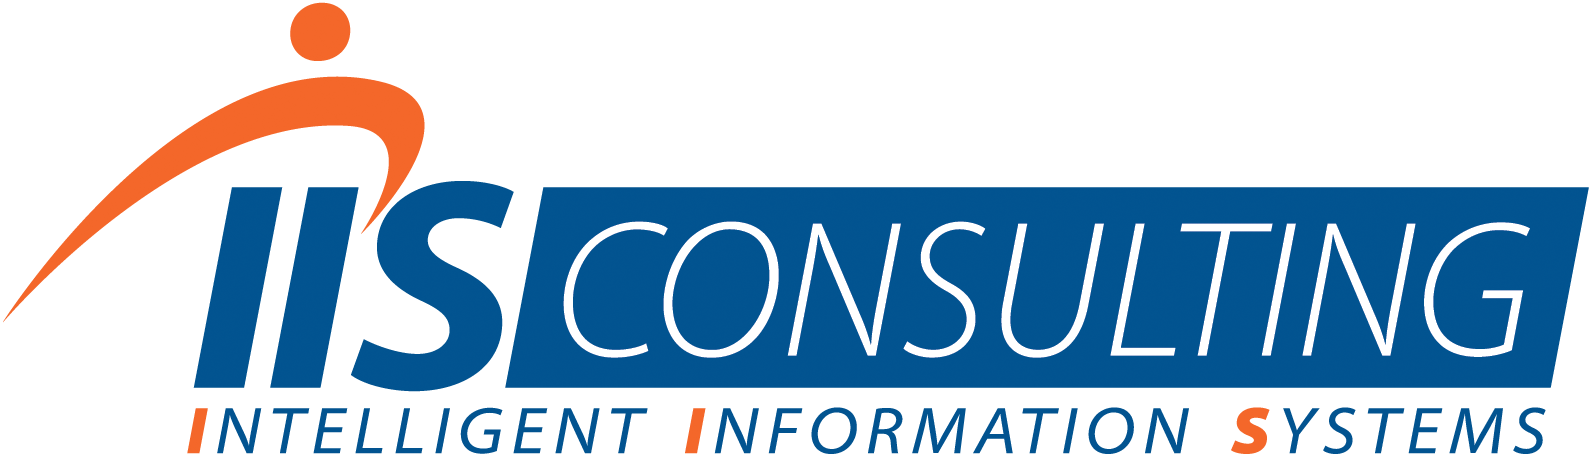 IIS Consulting